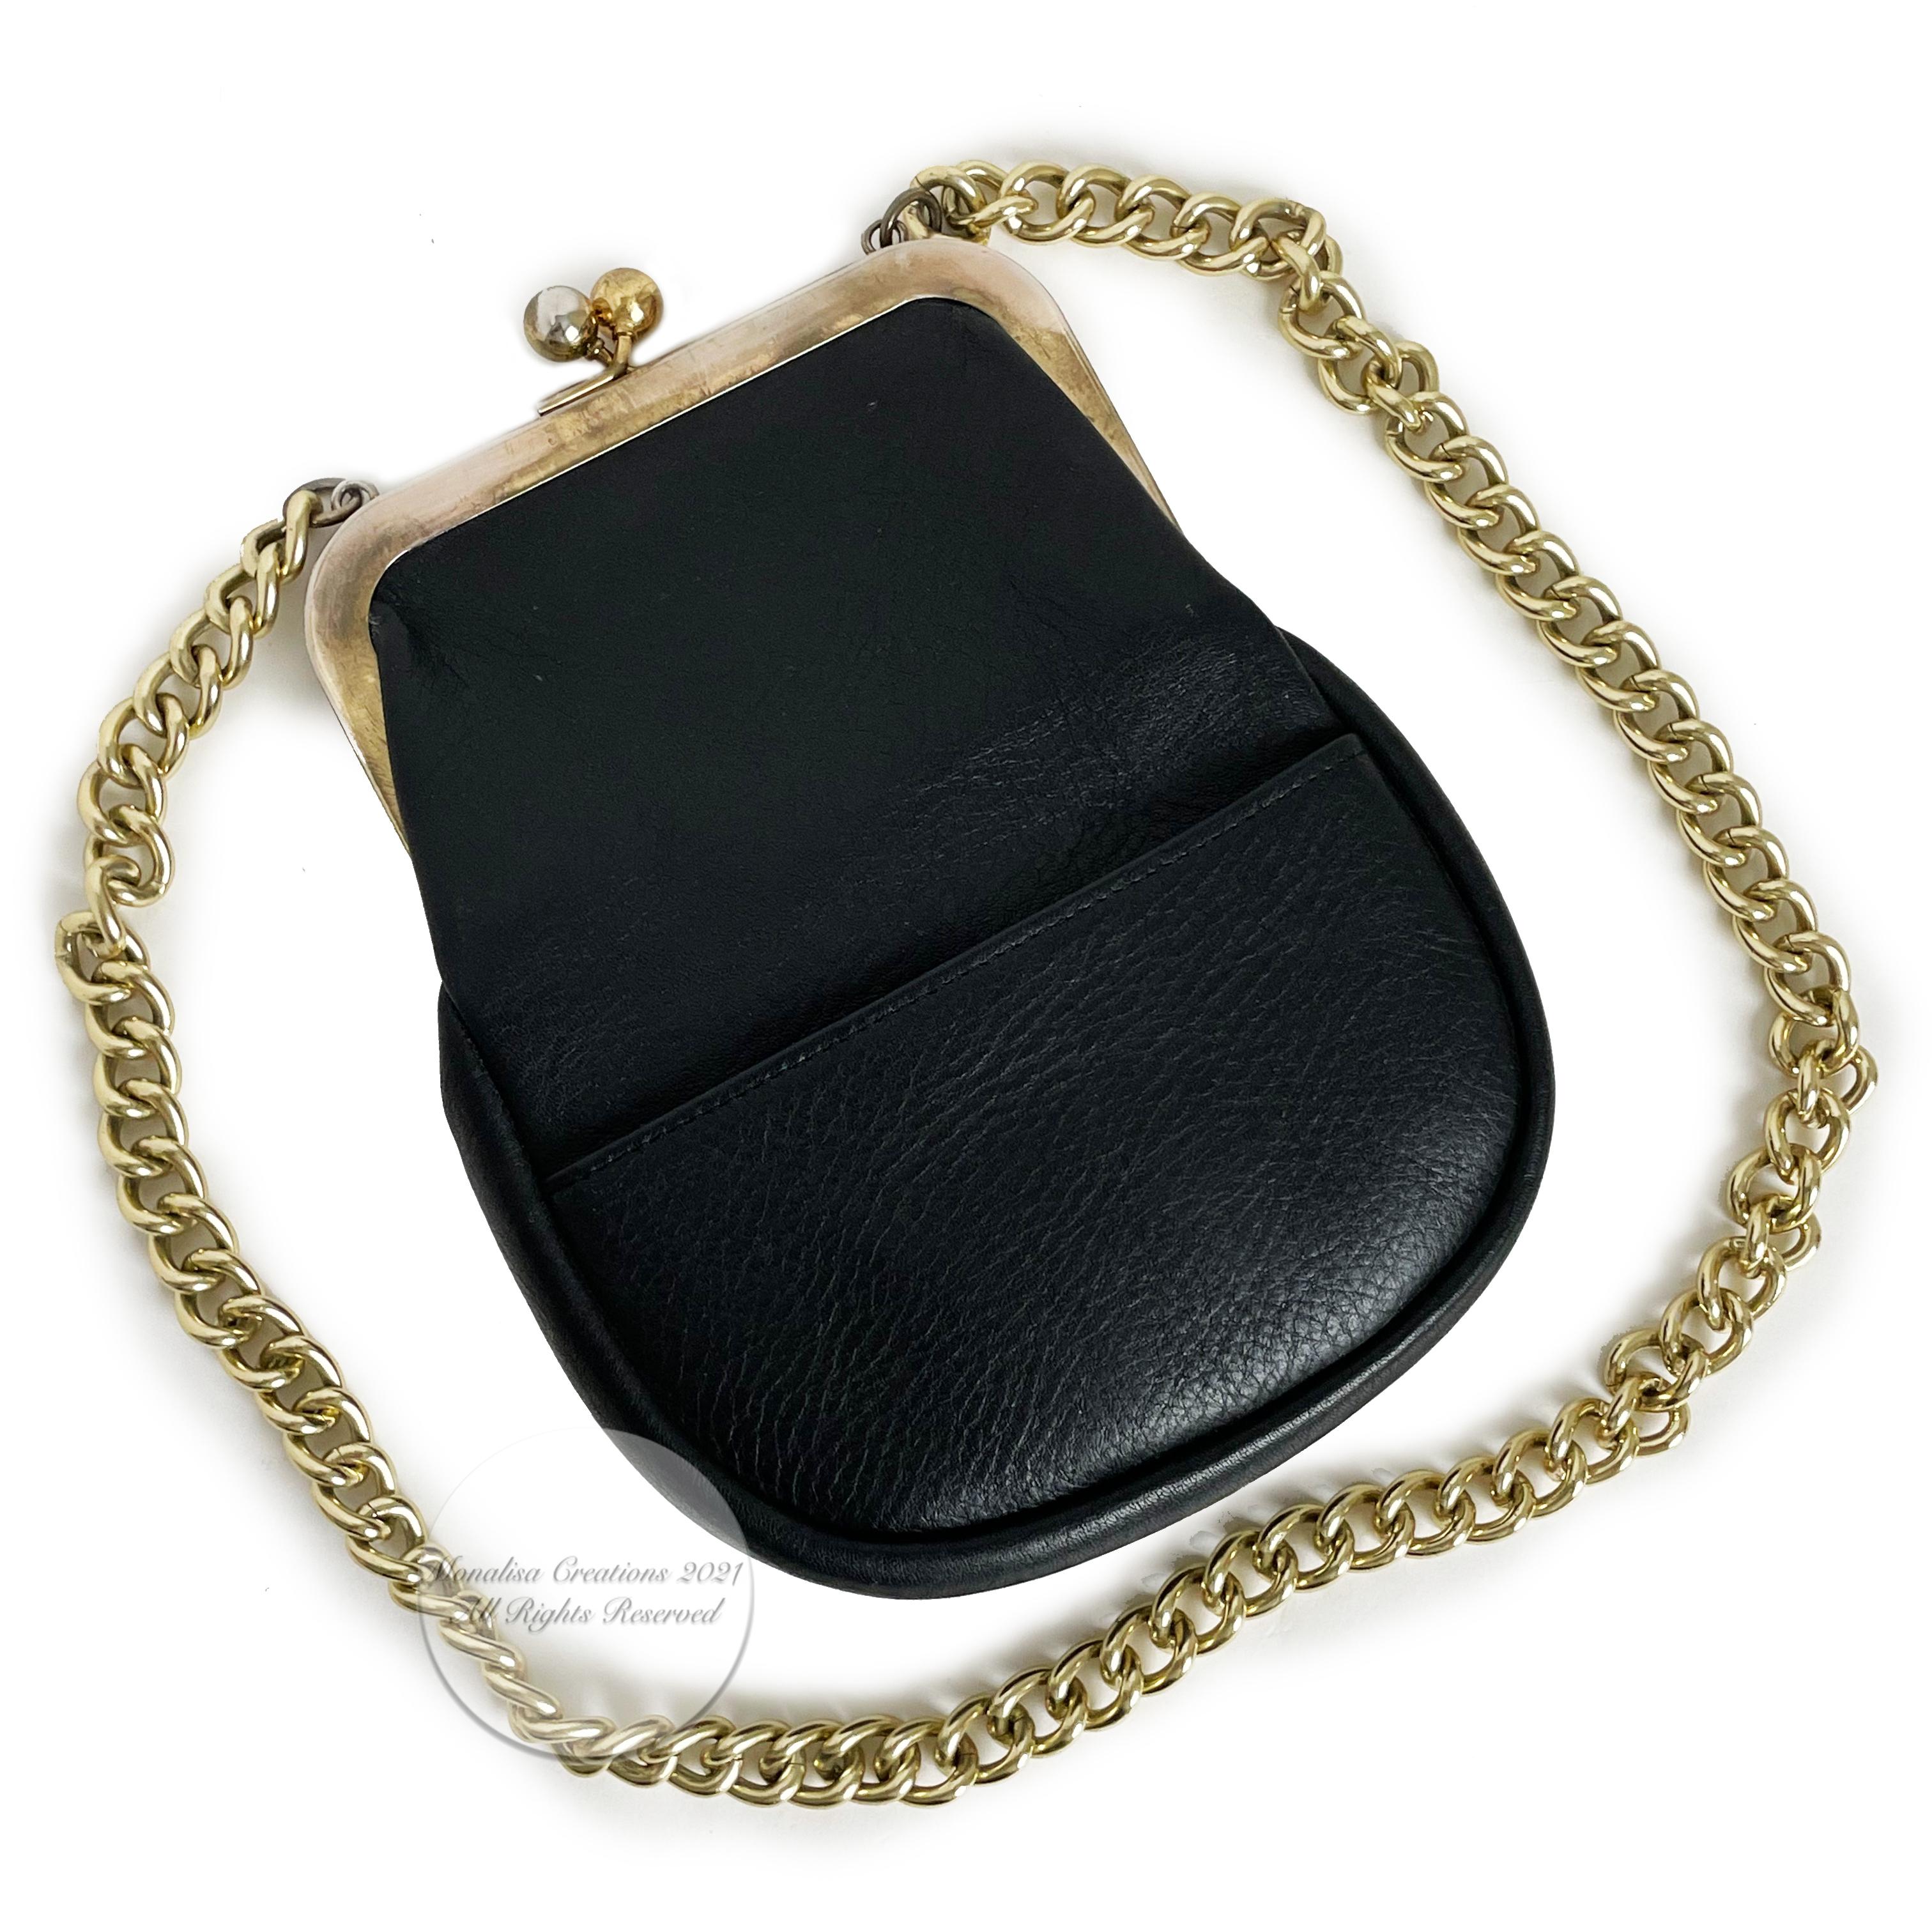 Authentic, preowned, vintage 60s Bonnie Cashin for Coach 'Cashin Carry' kiss lock evening bag with gilt chain strap. Black leather exterior w/1 slip pocket, lined in Bonnie's signature stripe fabric. Kiss lock main compartment w/striped fabric-lined